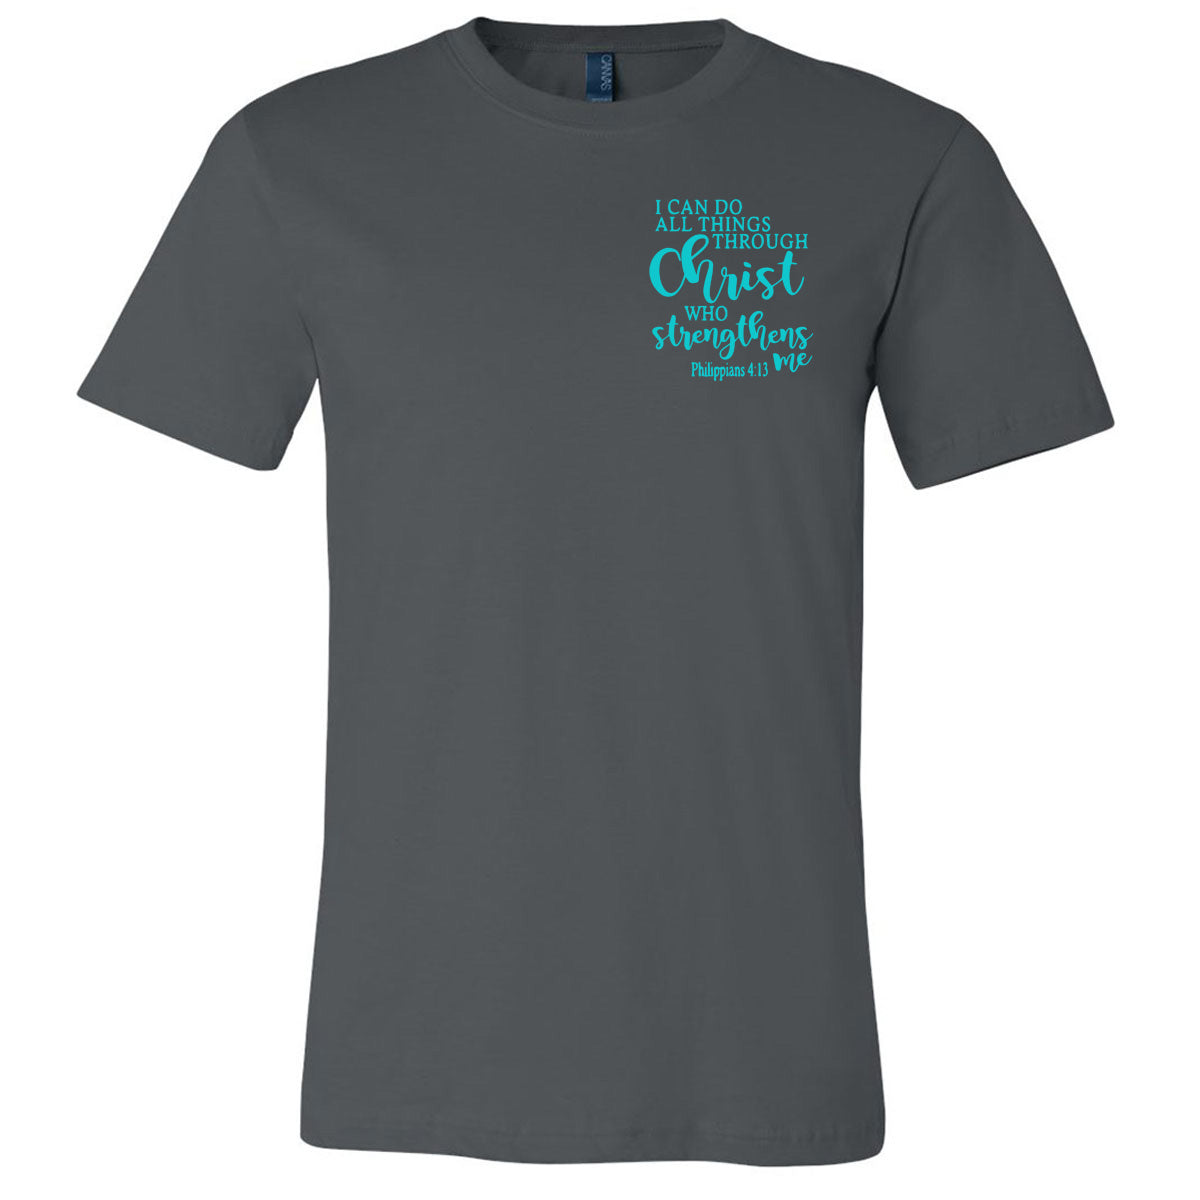 Act Like A Lady Ride Like A Boss - Storm Short Sleeves Tee - Southern Grace Creations